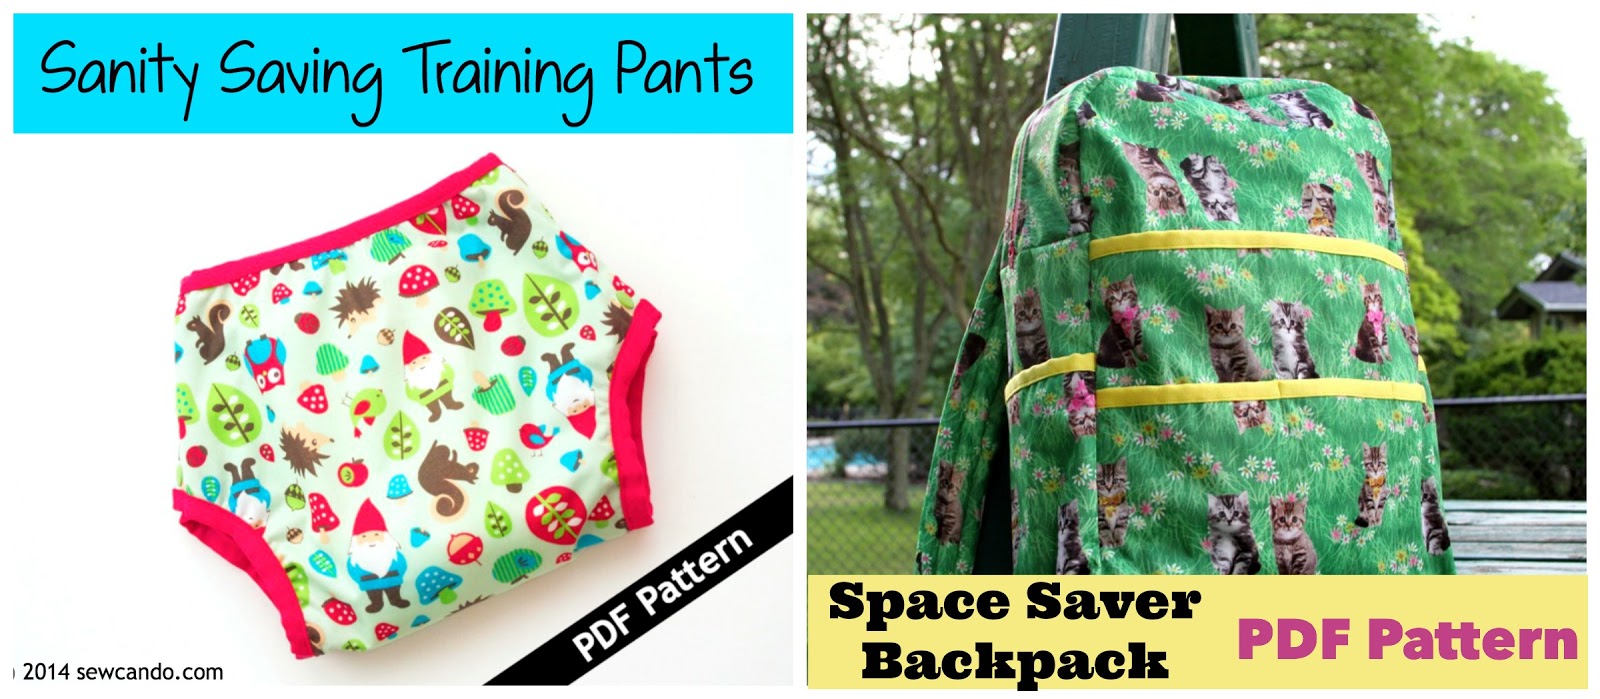 15+ Sewing Projects that Use PUL Fabric